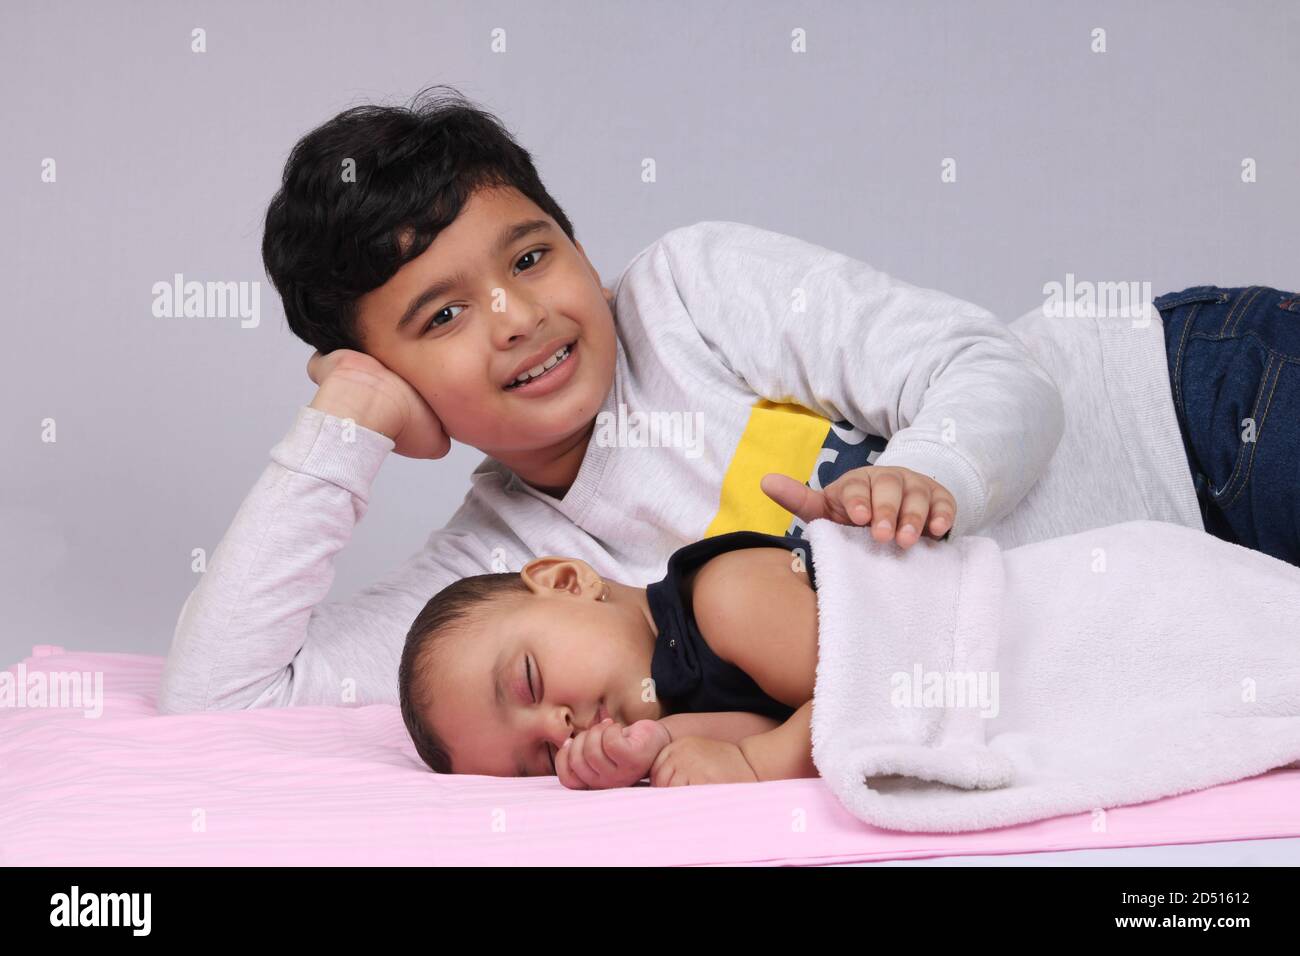 young Indian brother comforting his sister while she is asleep. Stock Photo